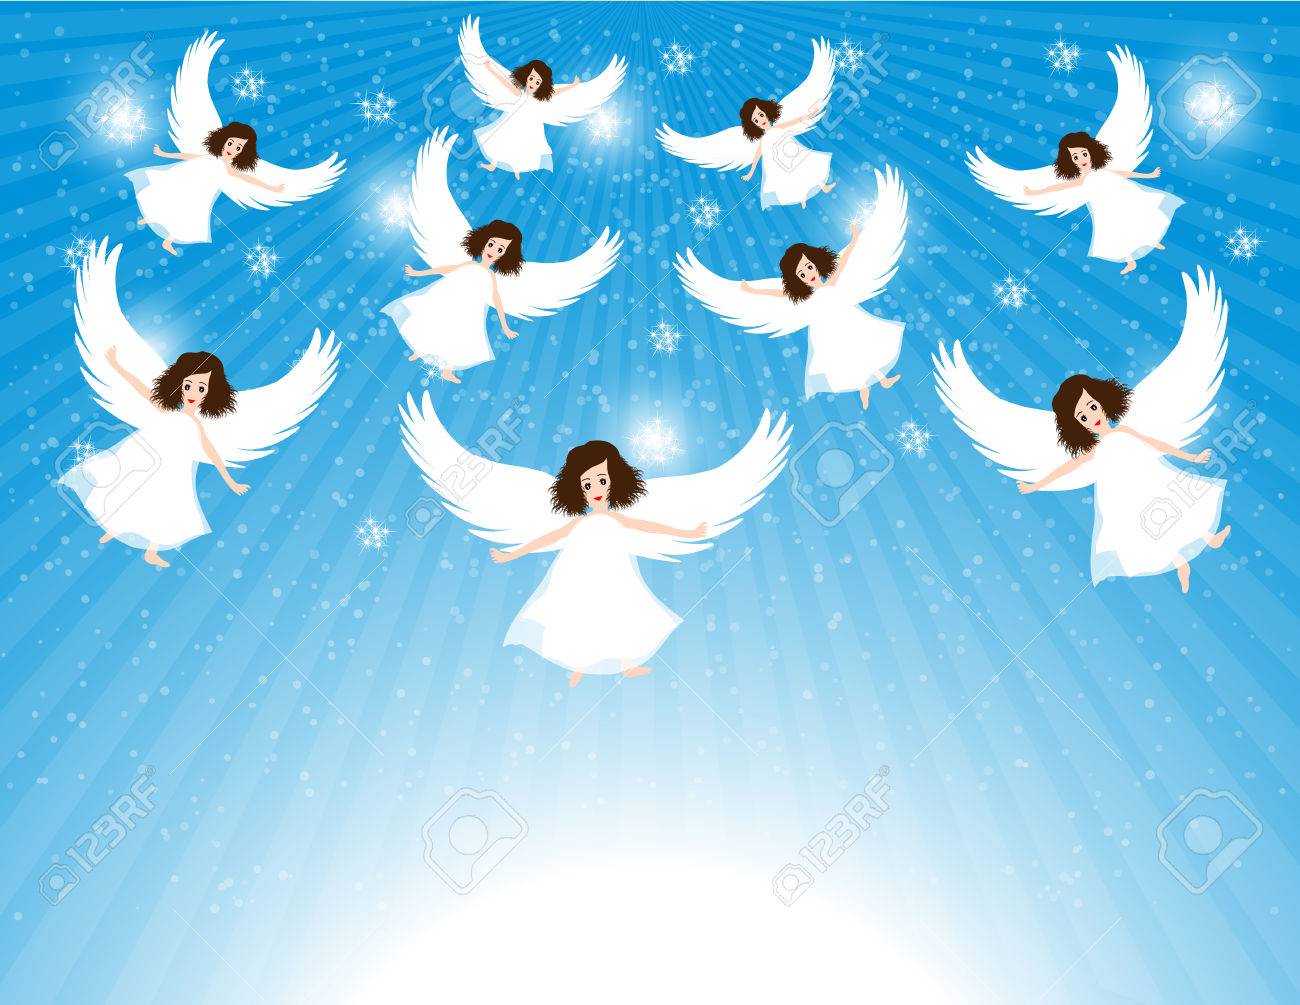 Free Angels Clipart group angels, Download Free Clip Art on